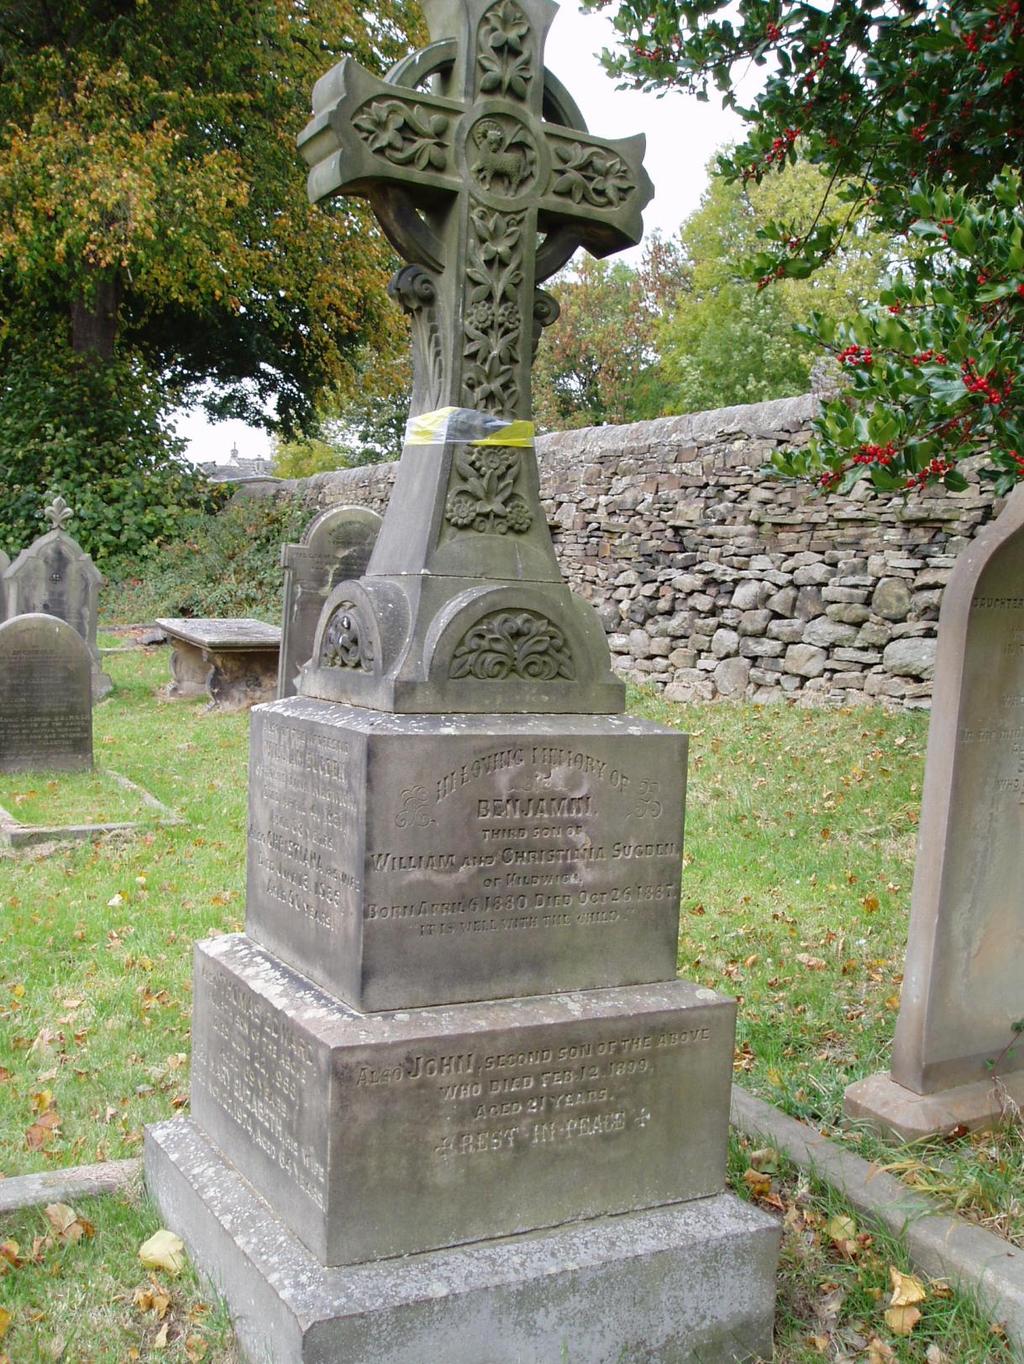 The Sugden family grave, in Kildwick churchyard as it used to